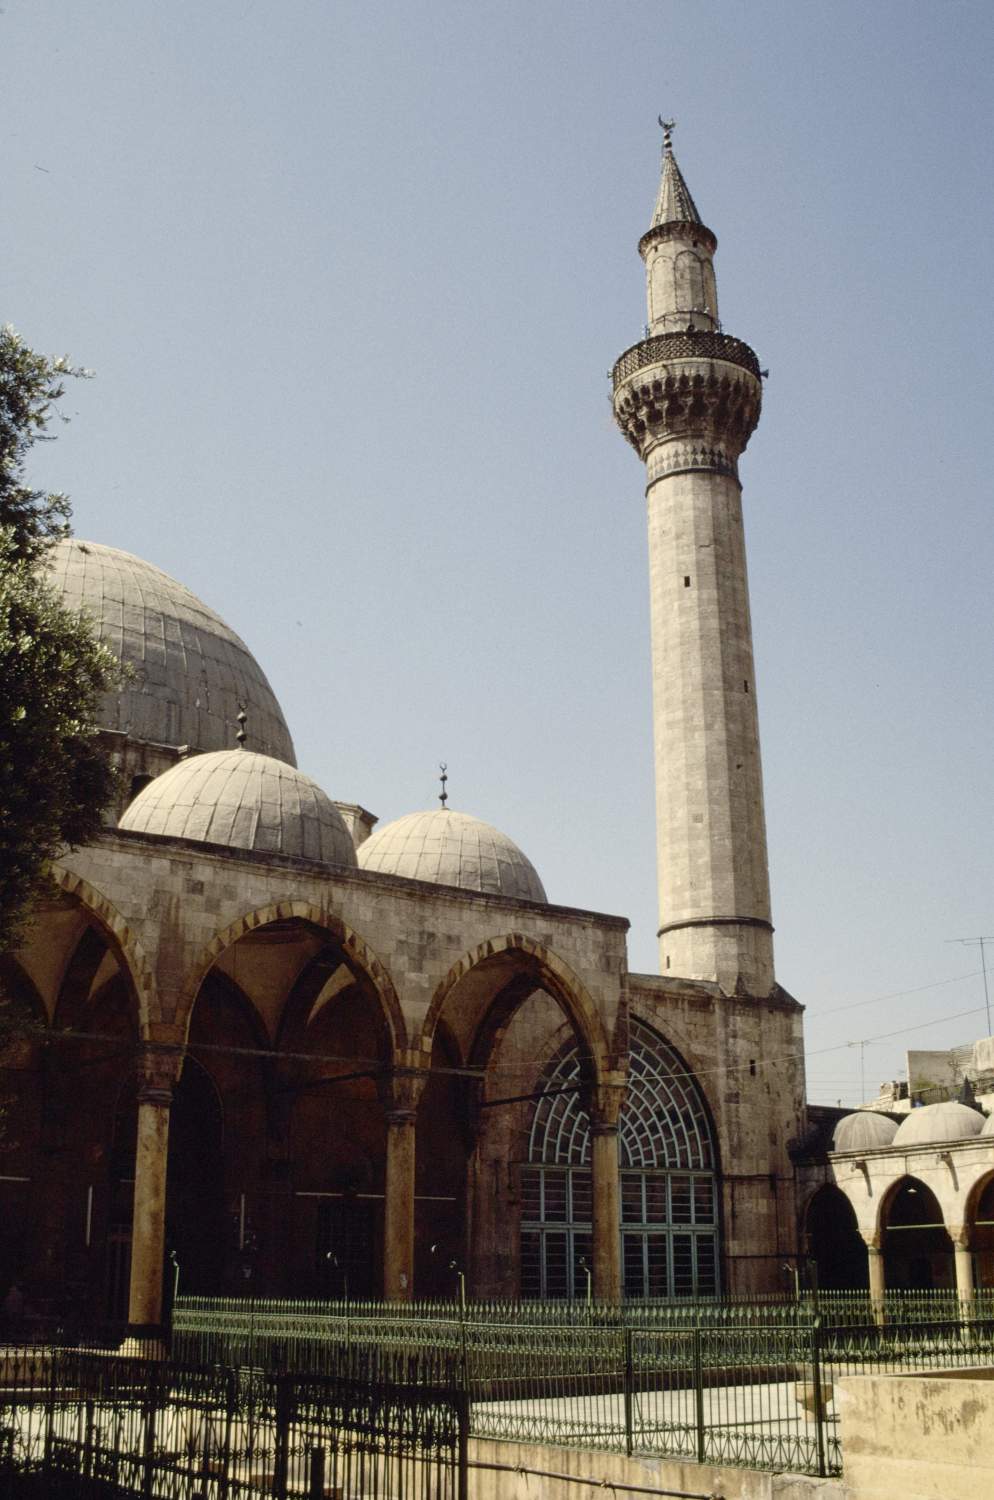 Southward view of minaret and mosque exterior.